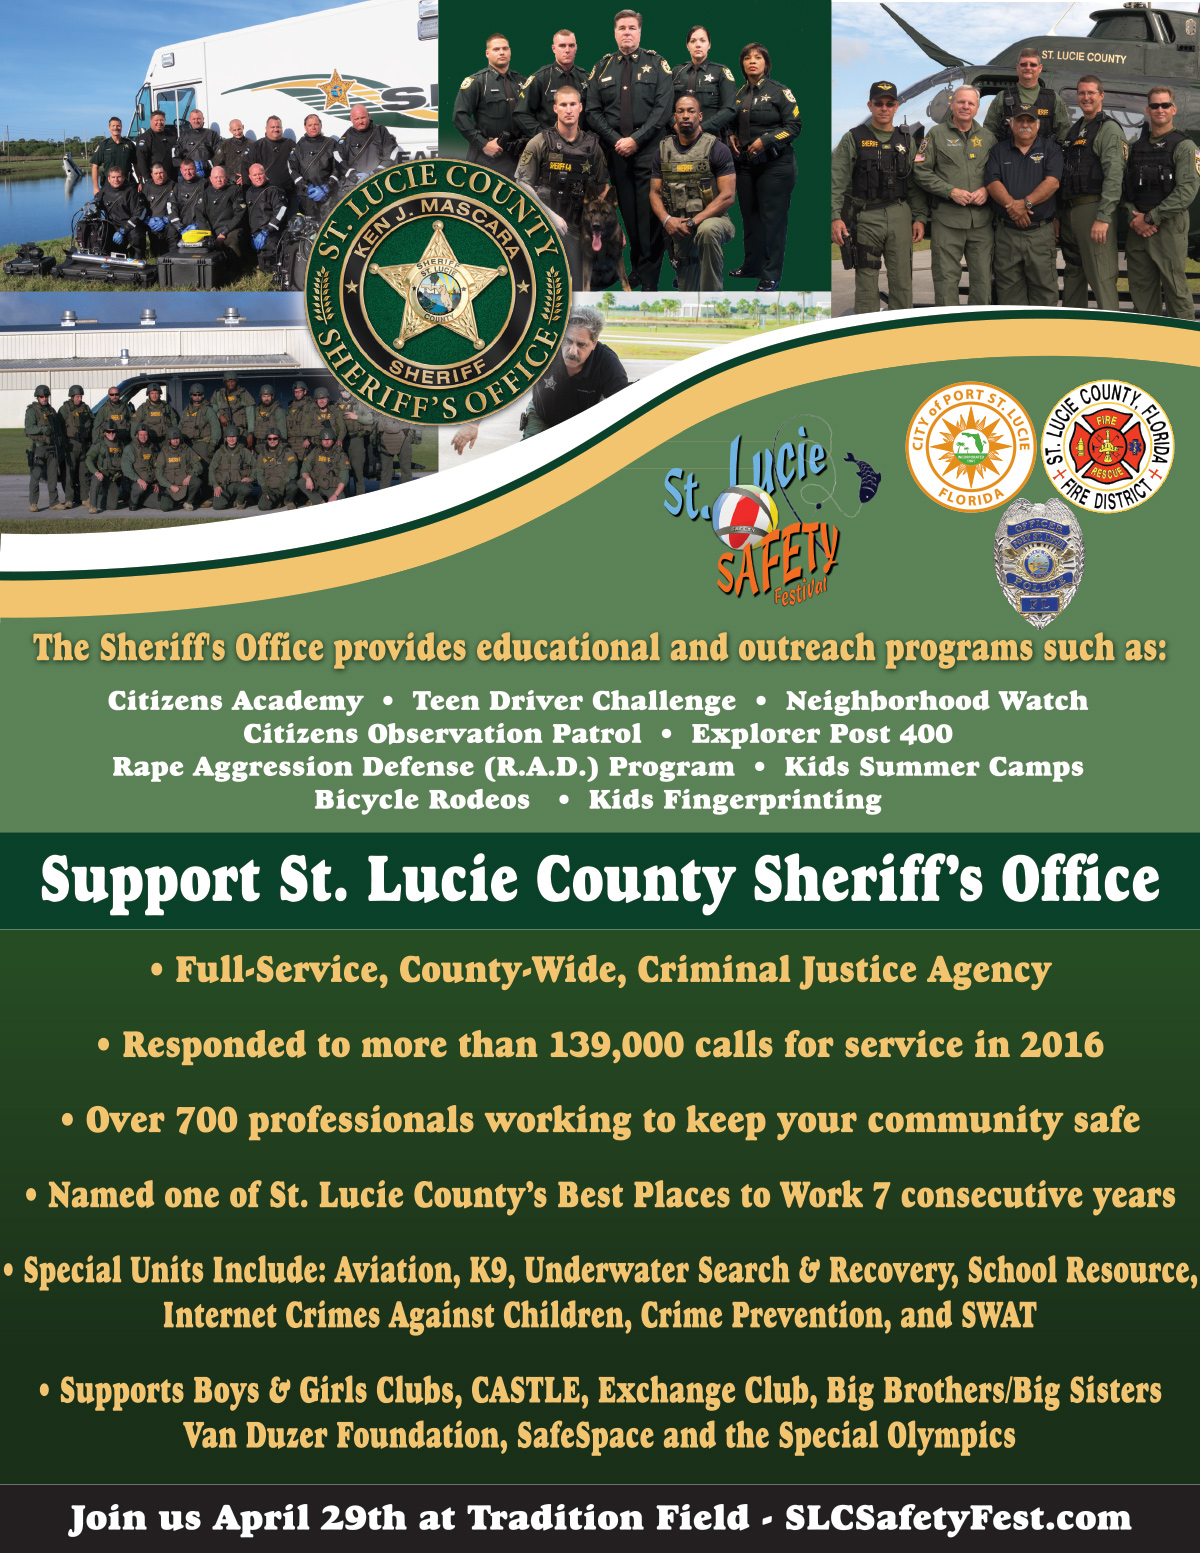 St. Lucie County Sheriff Department